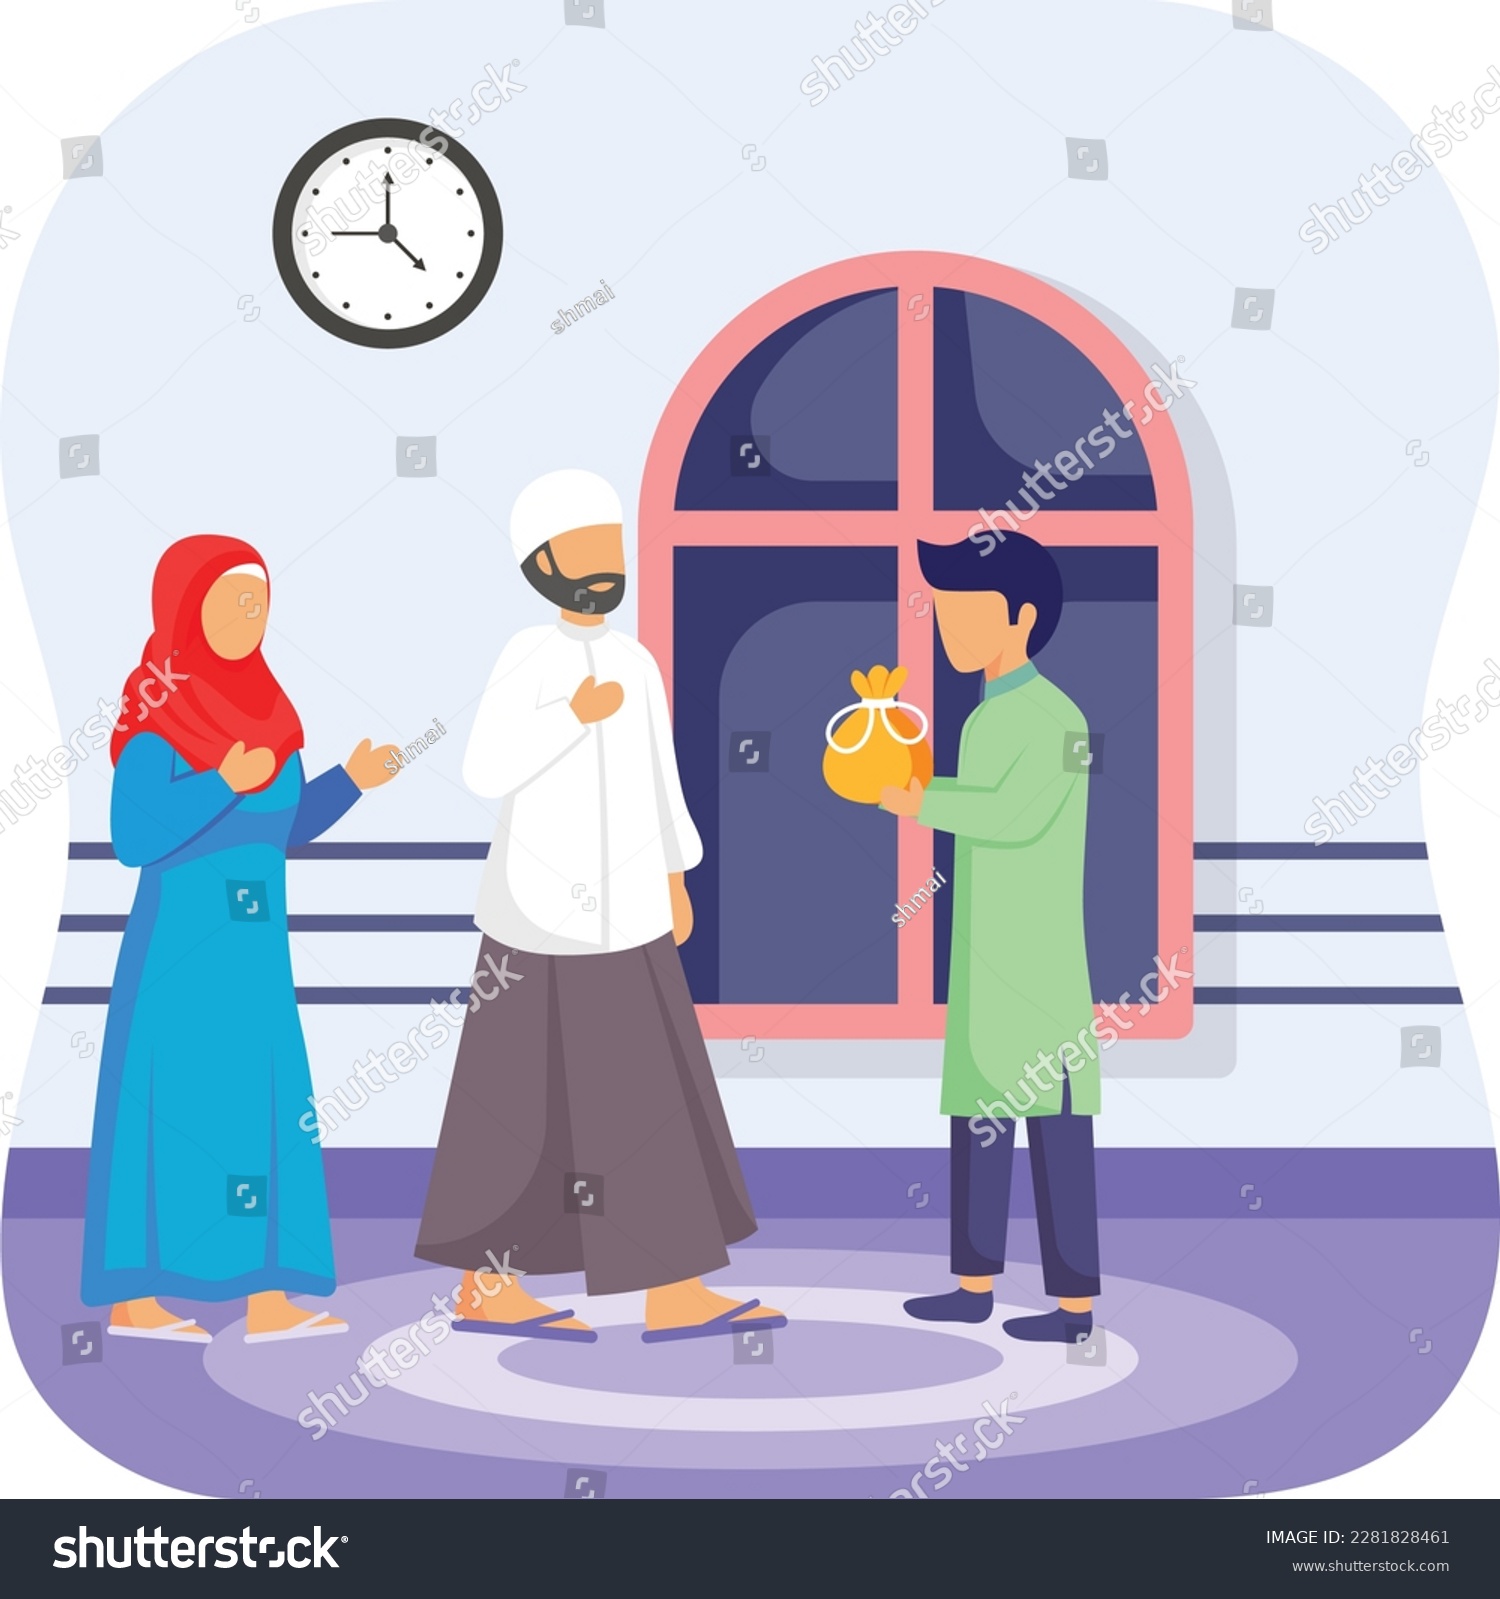 SVG of Ration Hamper Gift to Needy Family concept, Giving Help vector icon Design, Ramazan and Eid al-Fitr Symbol, Islamic and Muslims fasting Sign, Arabic holidays celebration stock illustration svg